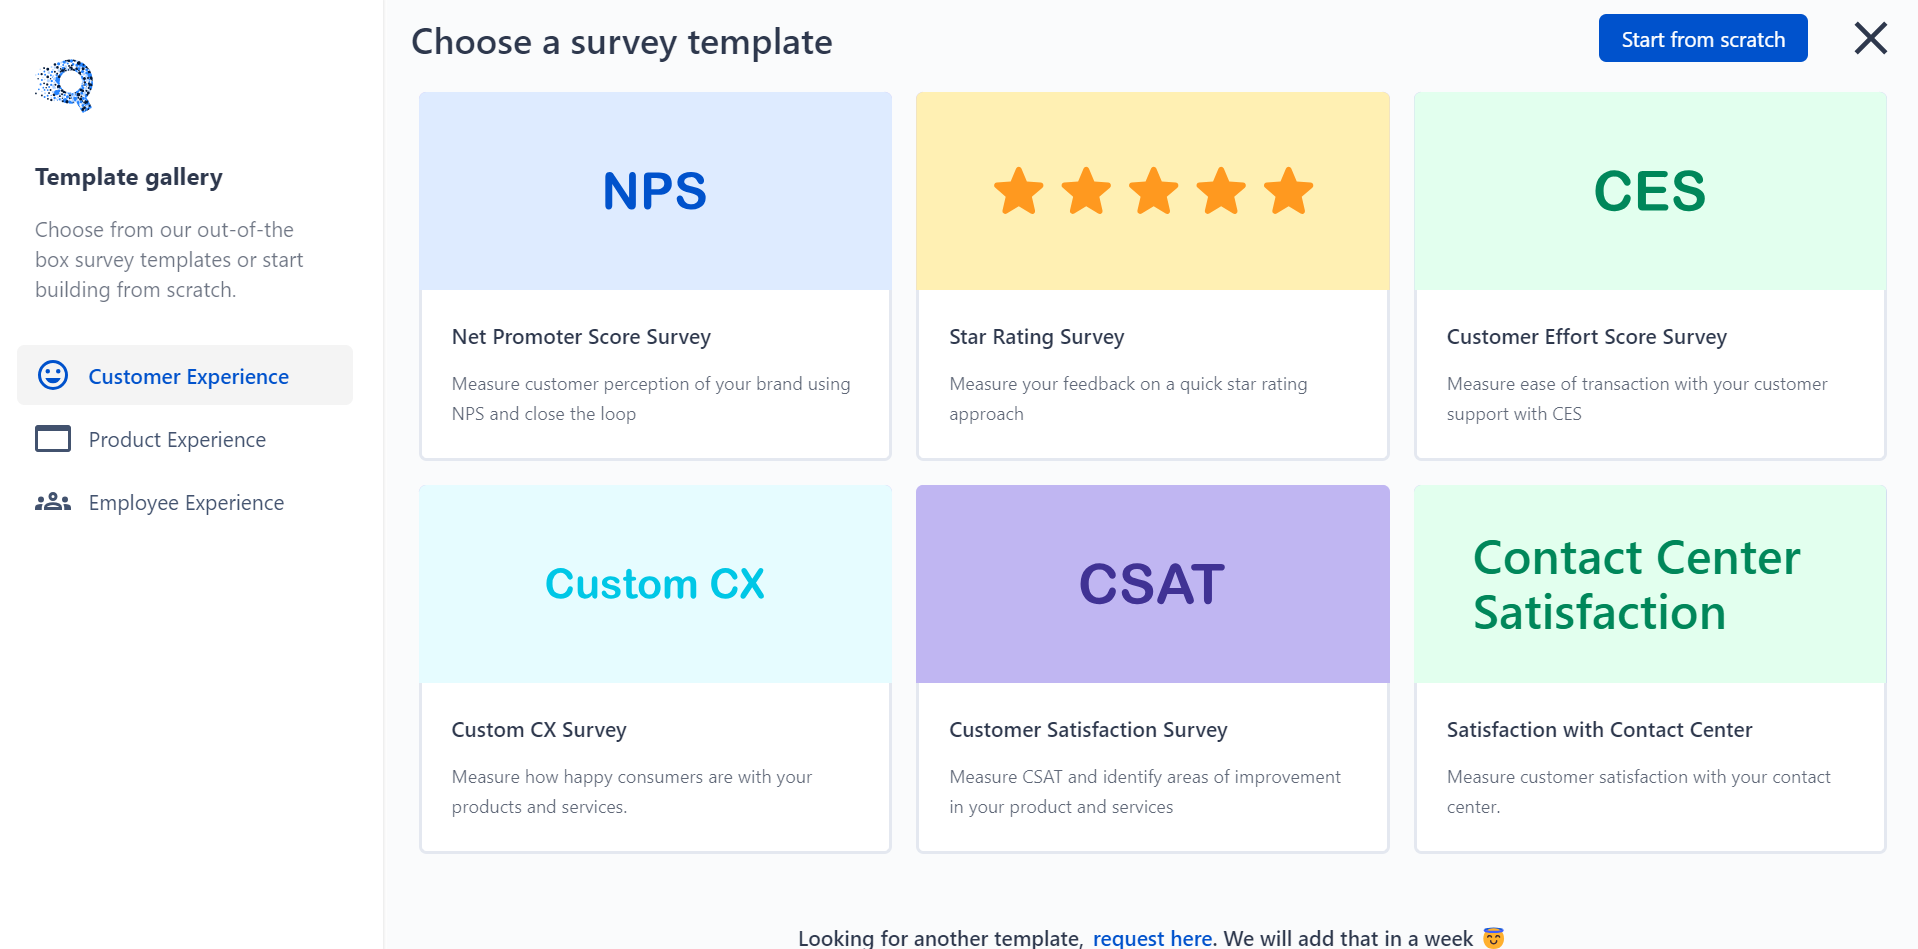 This is the image of the Customer experience survey templates with different types of surveys - NPS, star rating survey, CES, Customer CX, CSAT, and Contact center satisfaction survey.